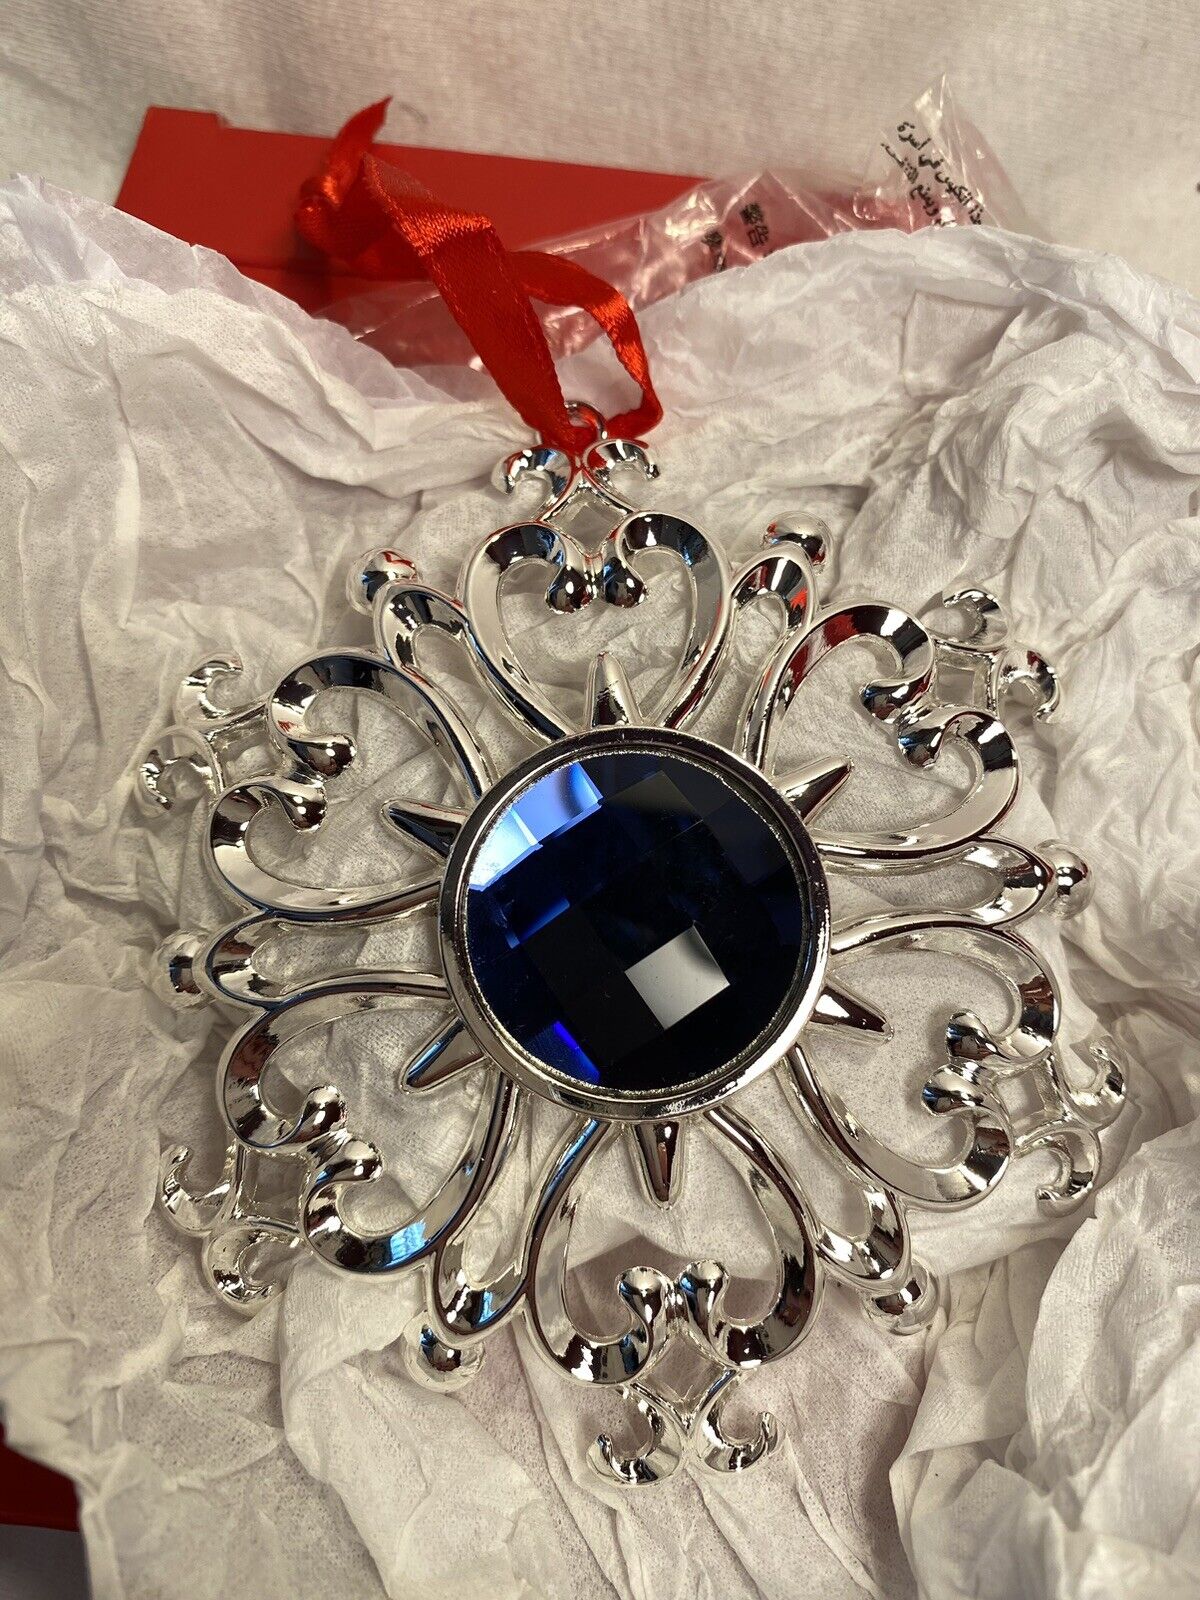 NEW Boxed Lenox BEJEWELED Snowflake Ornament Silver-plate Blue GEM #856360